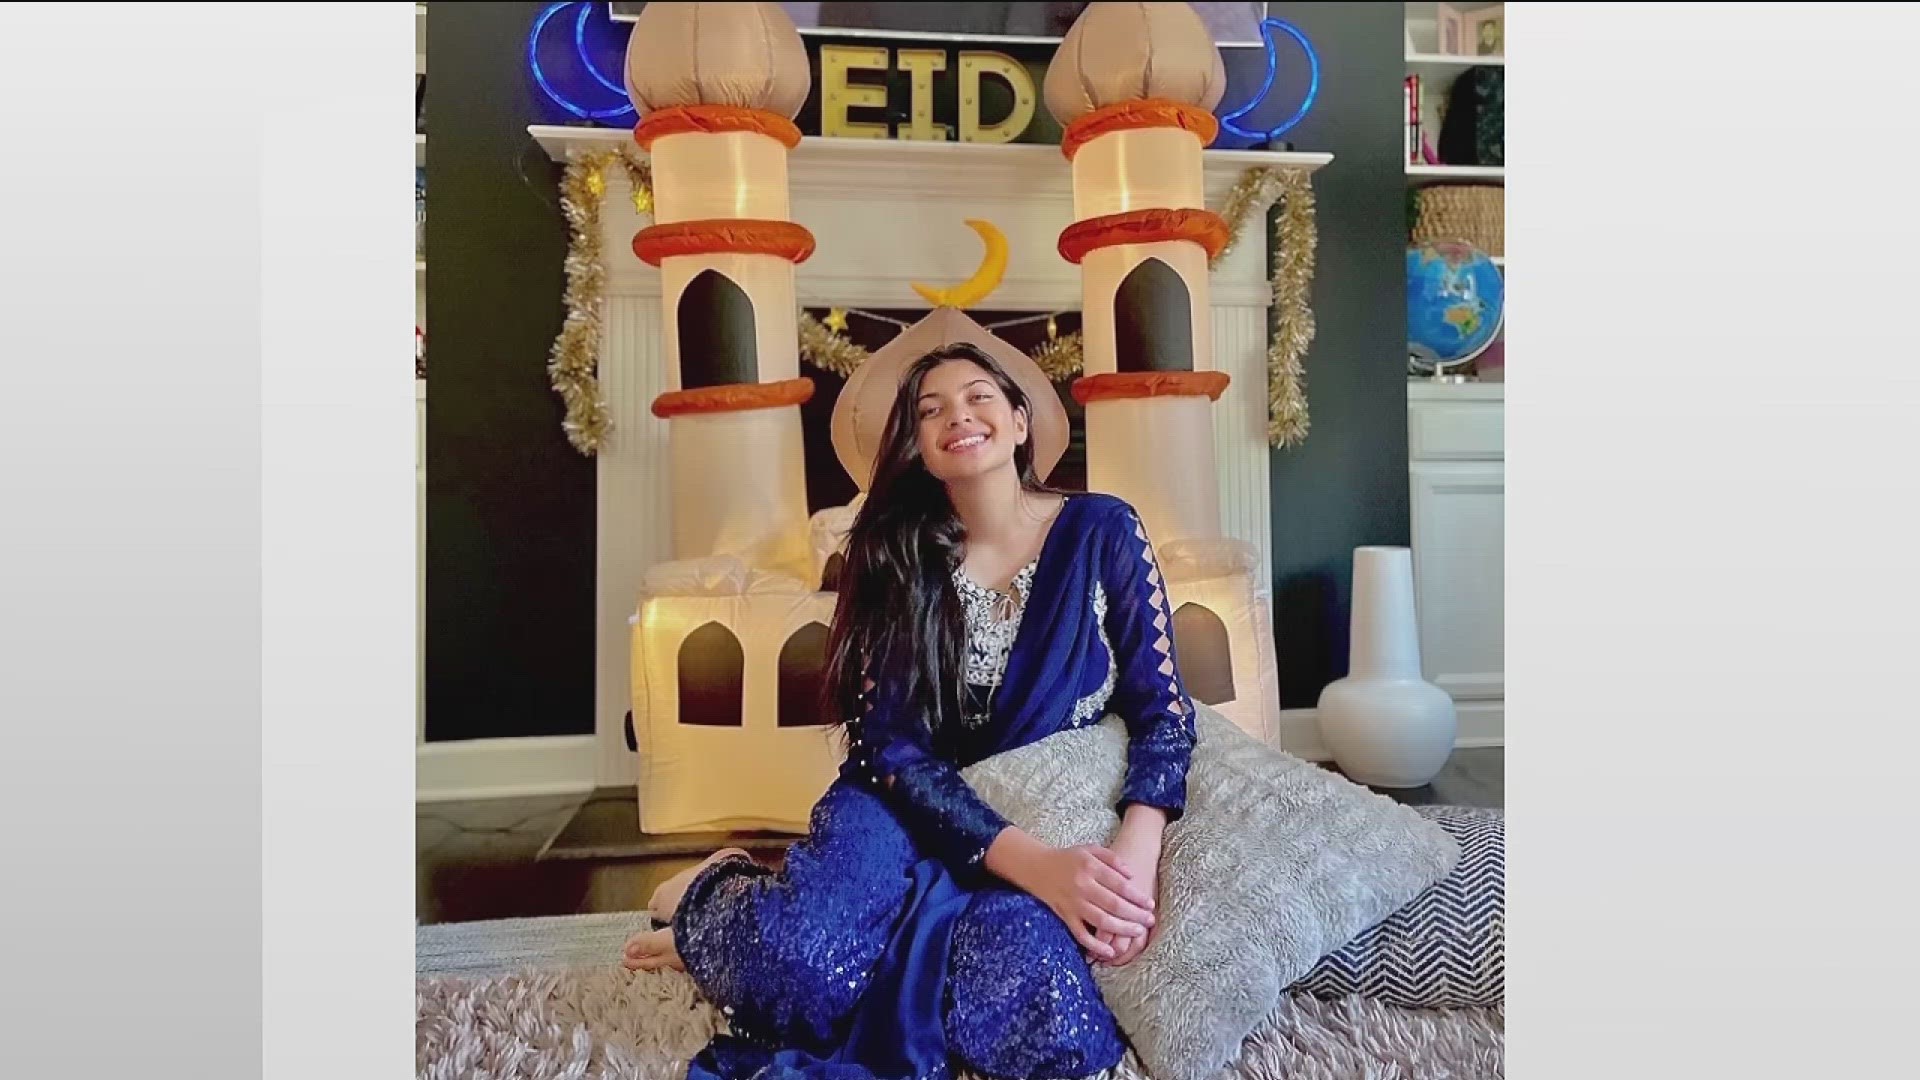 There are new developments involving a student's push to get EID added to her school district's calendar.